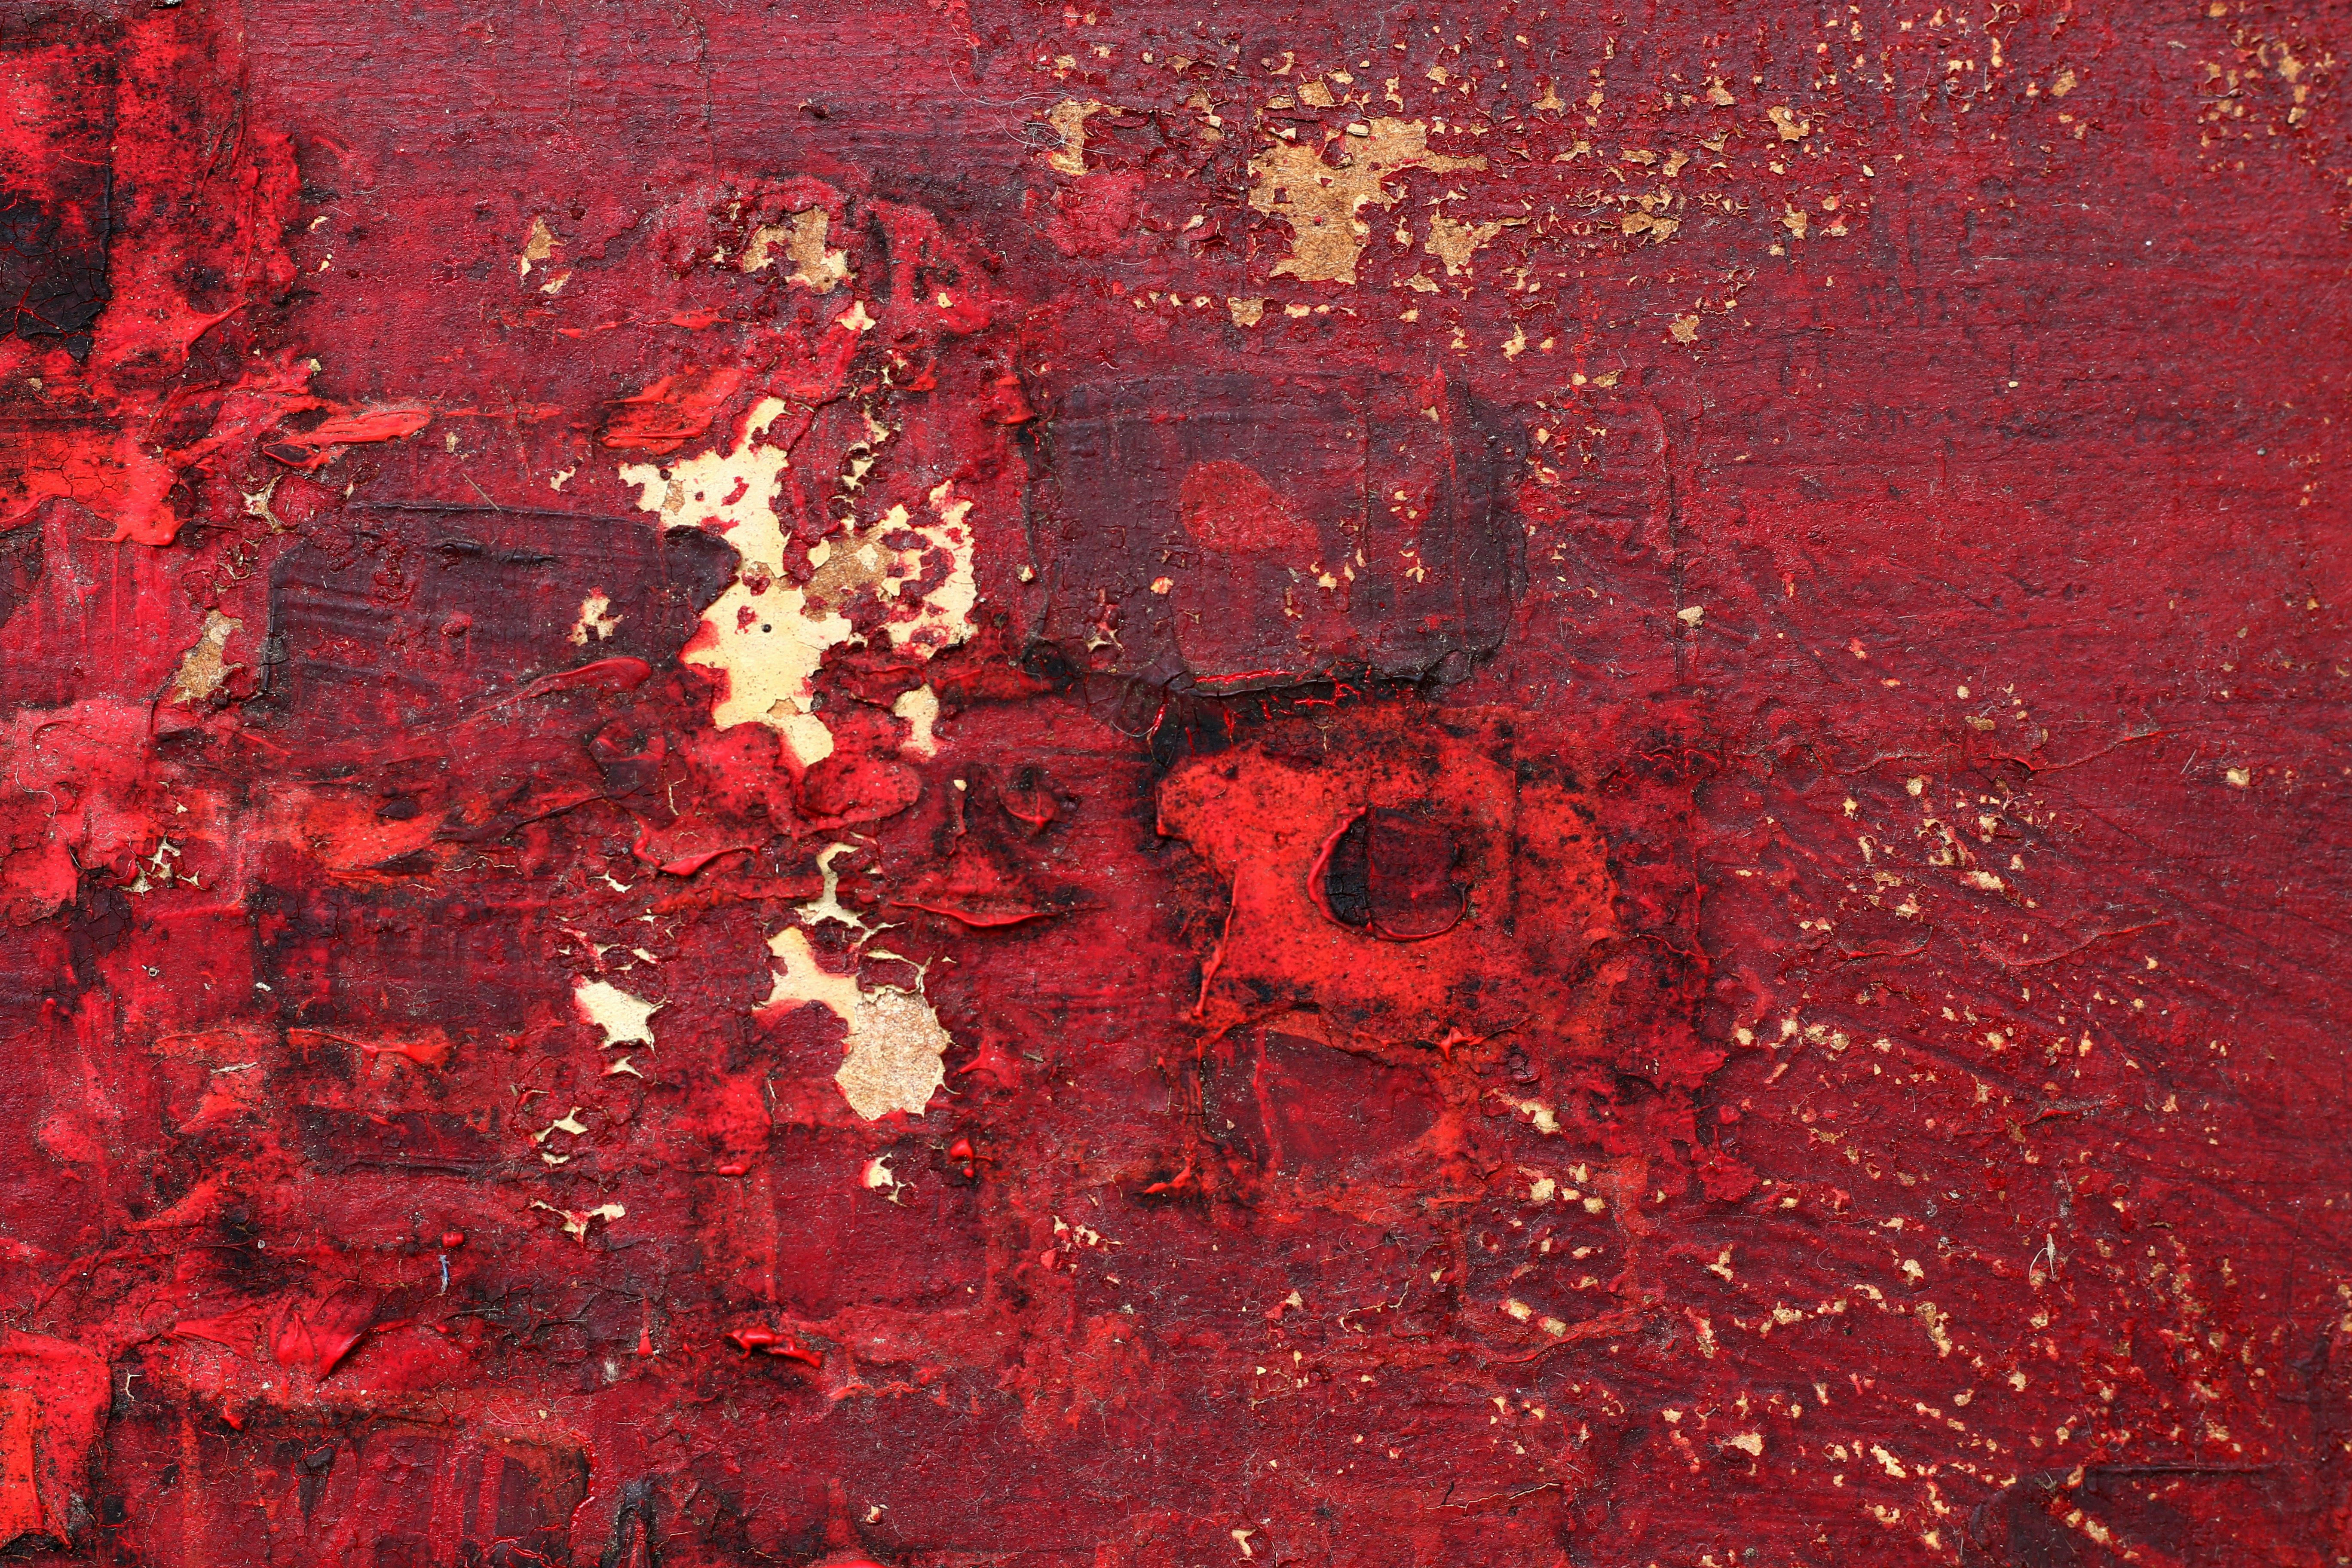 red and white abstract painting